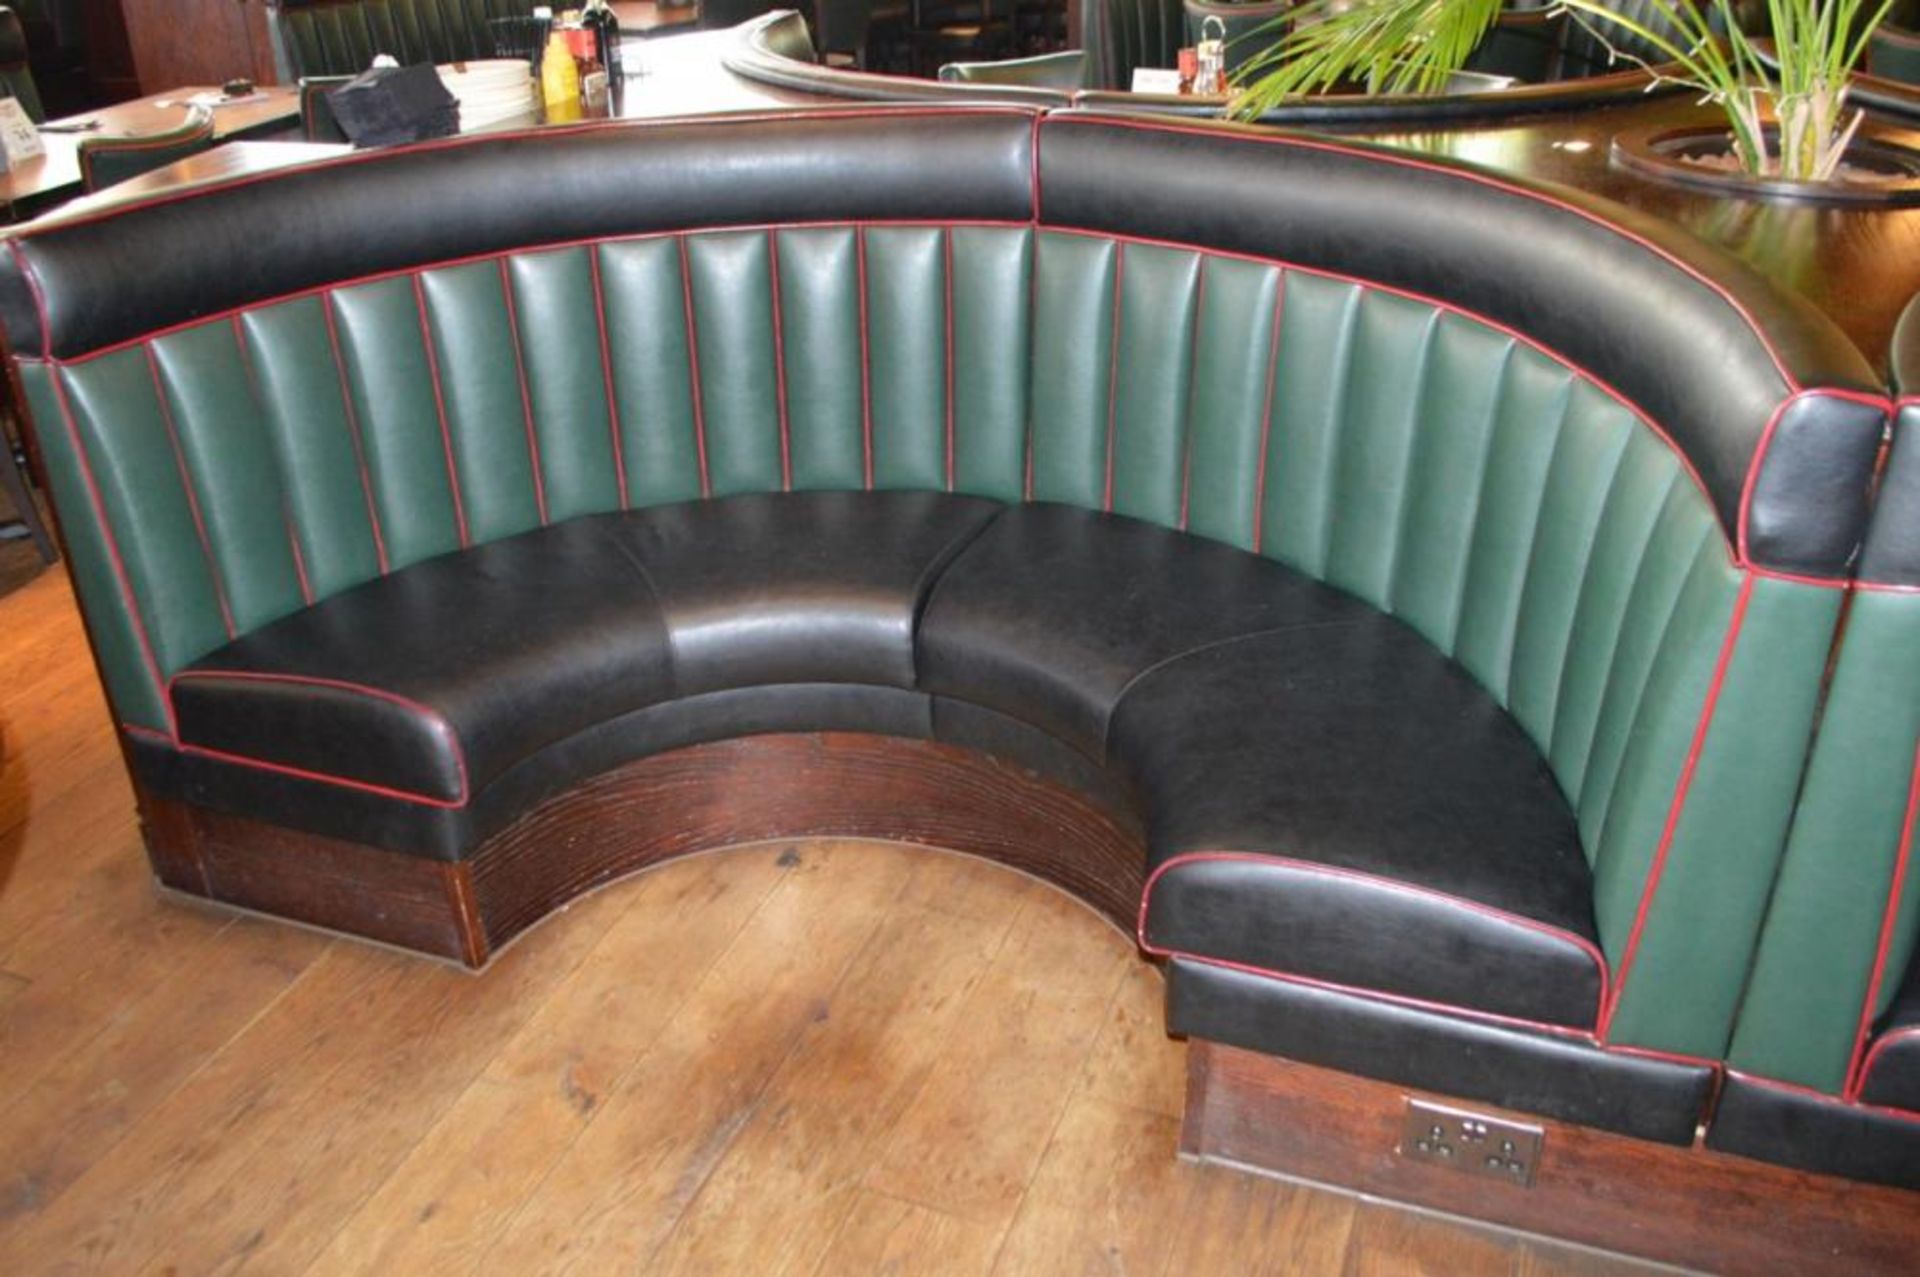 2 x Contemporary Half Circle Seating Booths - Pair of - Features a Leather Upholstery in Green and